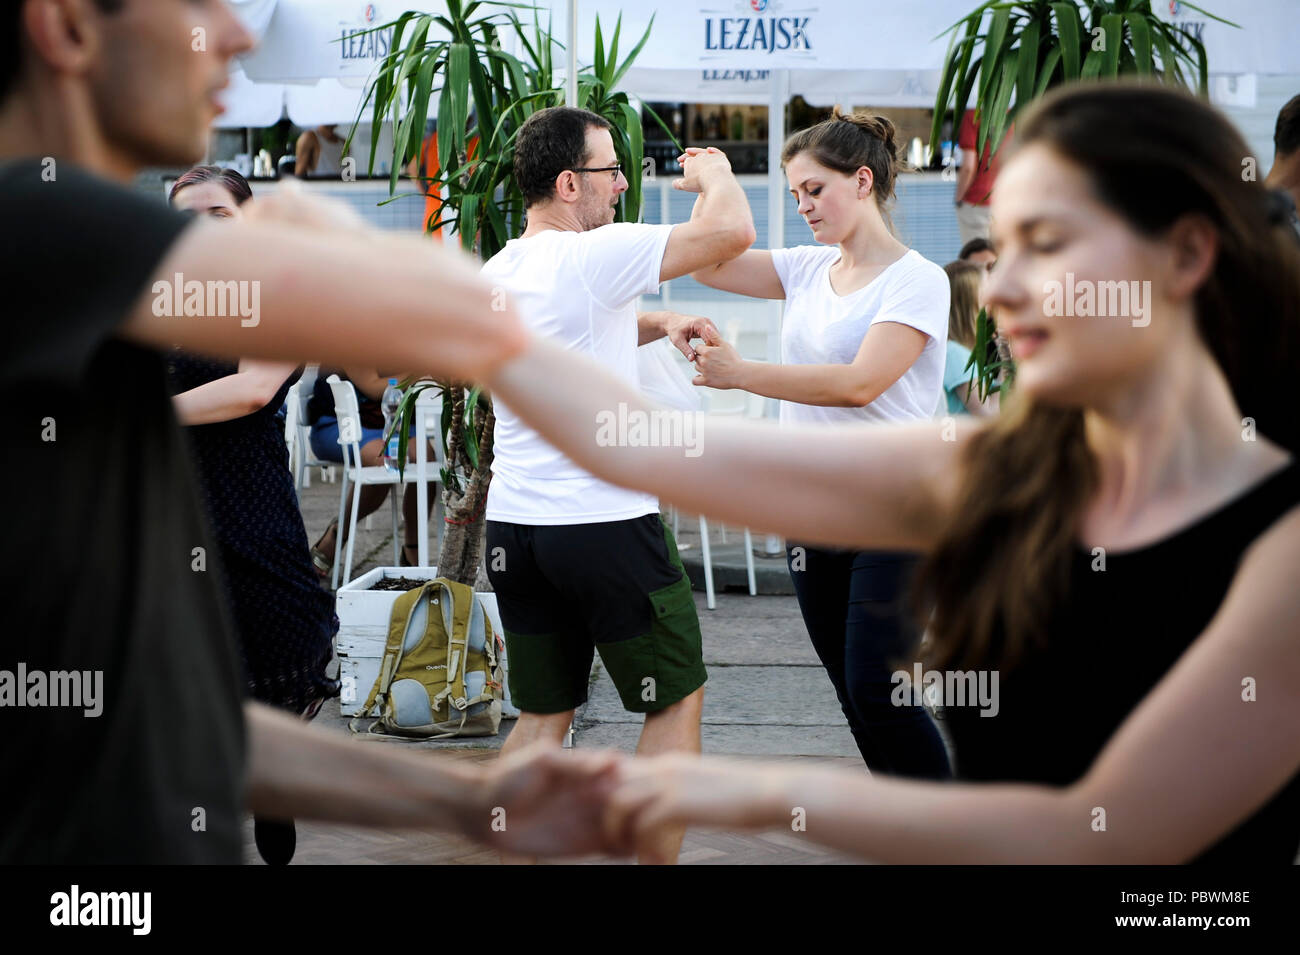 Warsaw, Poland. 30th July, 2018. People attend a West Coast Swing dancing  lesson by the Vistula River in Warsaw, Poland, on July 30, 2018. West Coast  Swing is a popular dance style